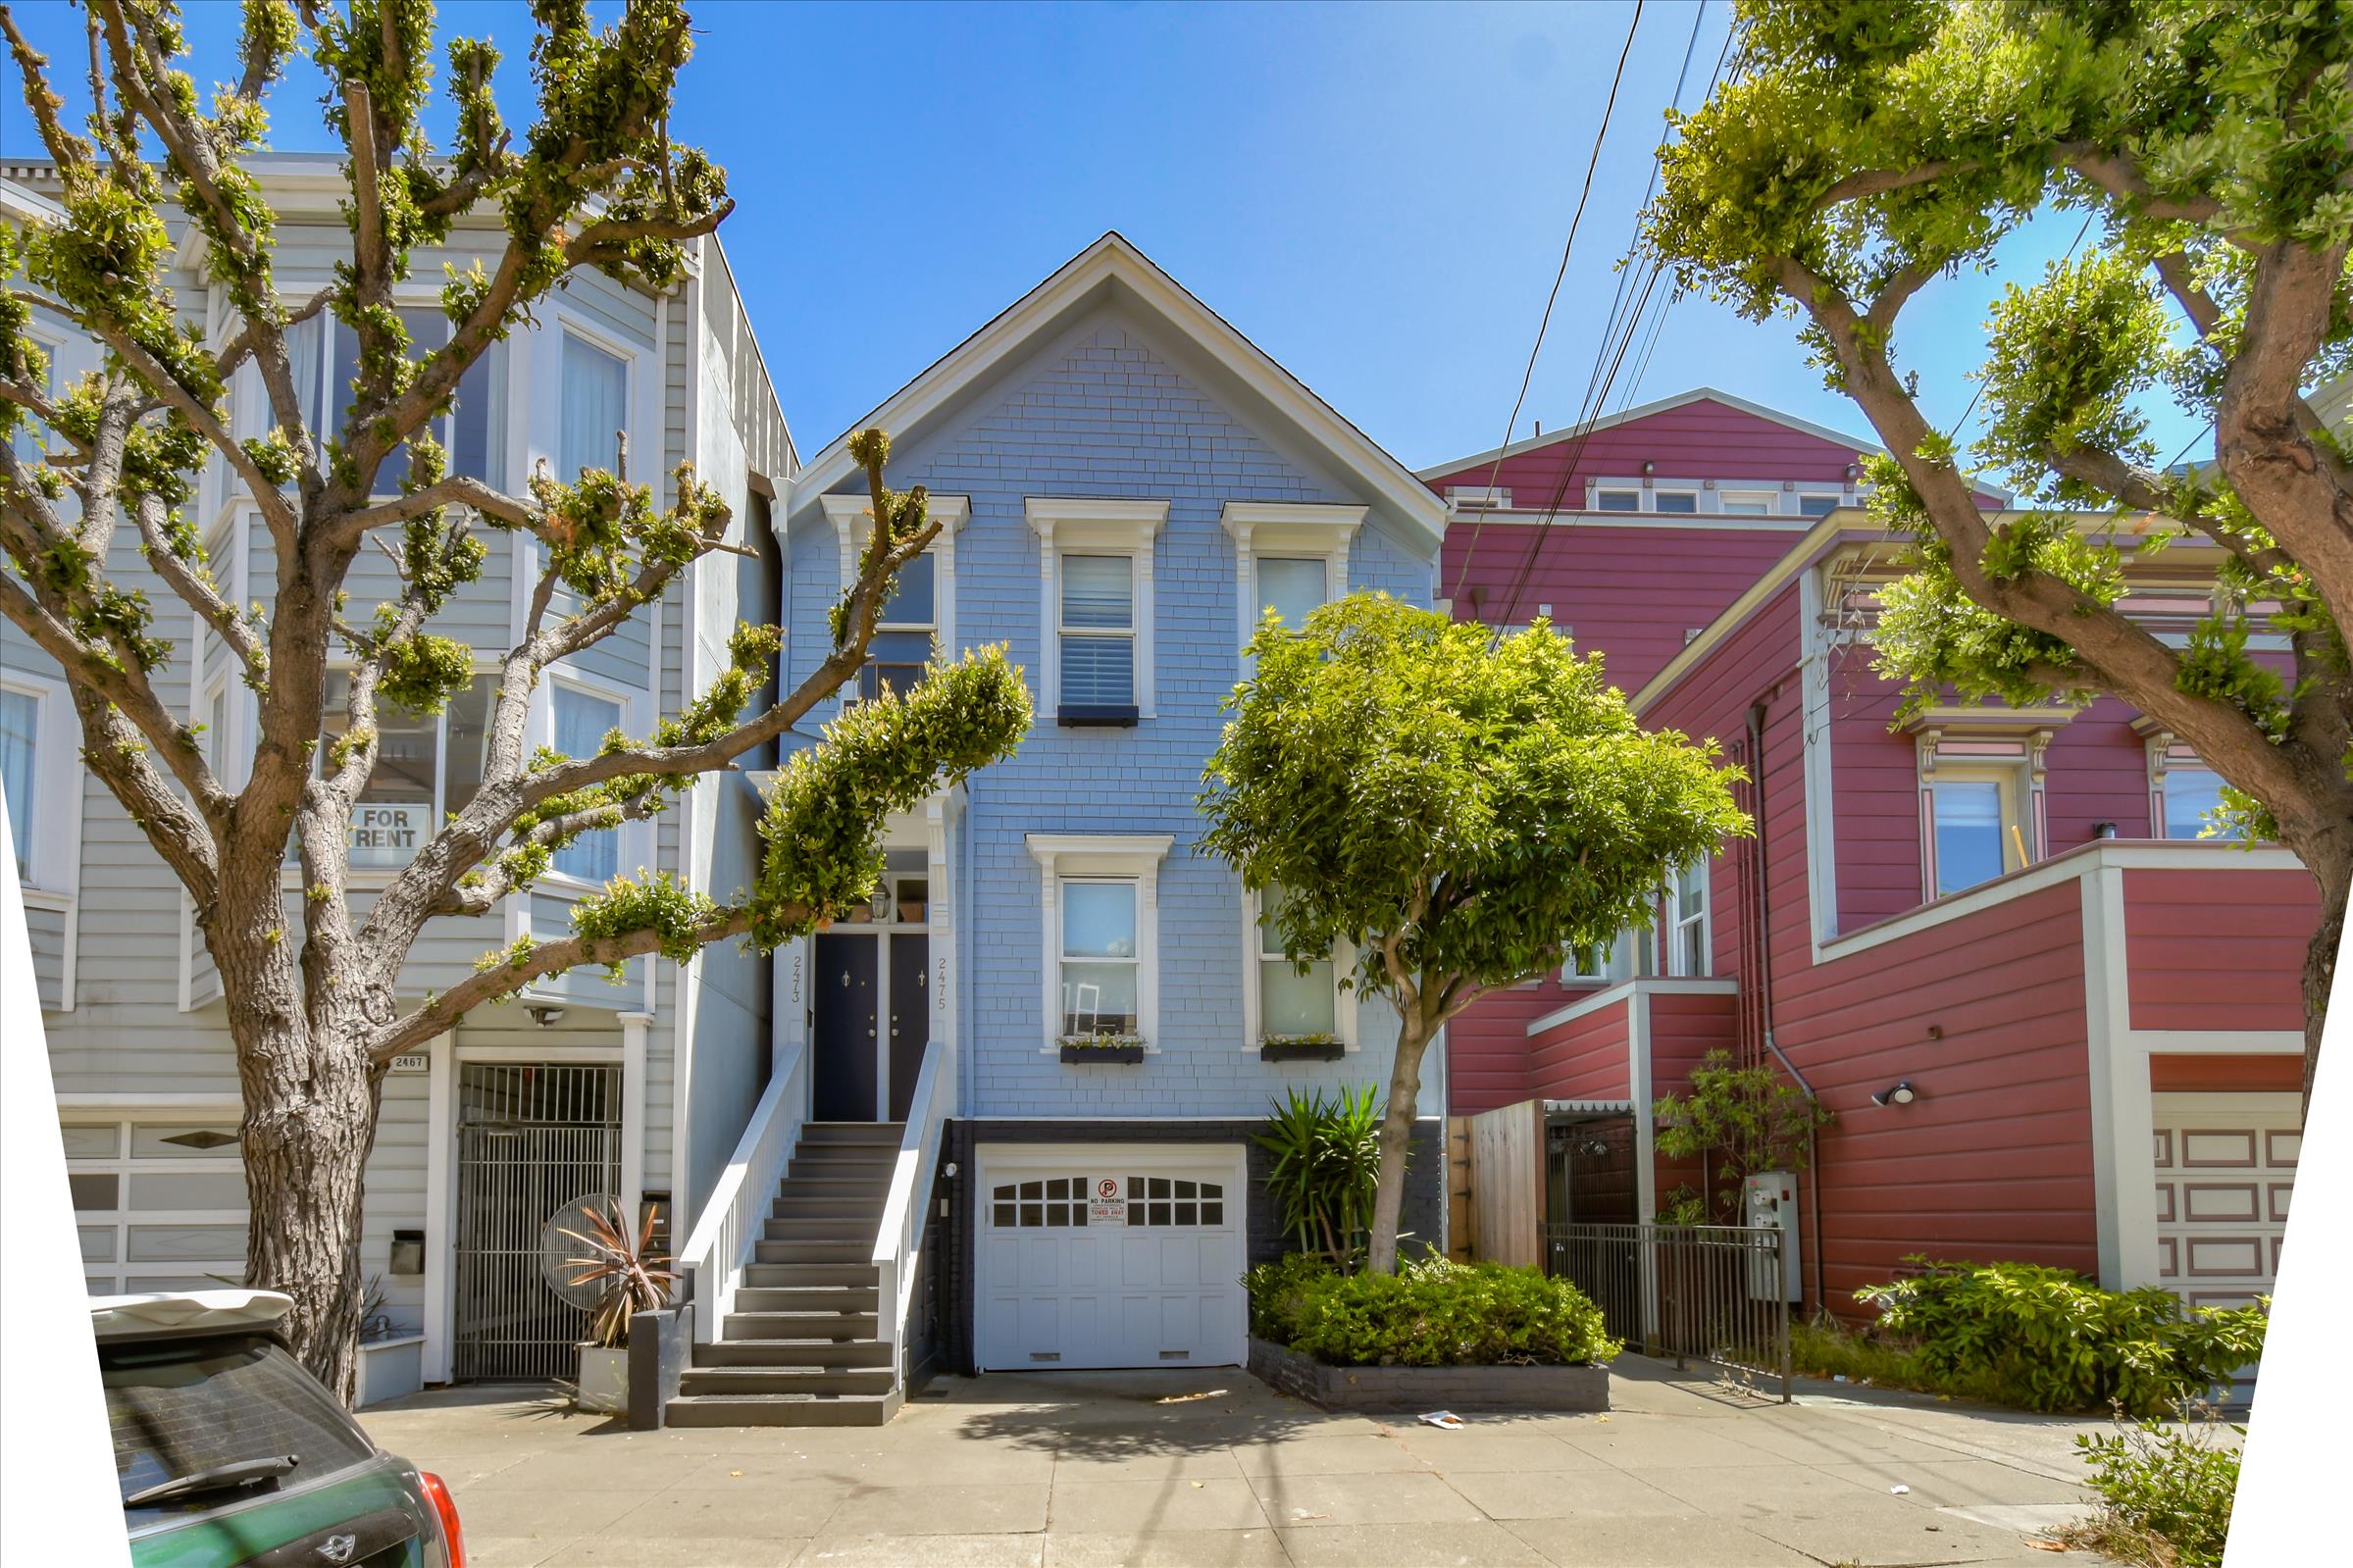 Beautiful Outer Mission, San Francisco, CA house showcasing the best property management services